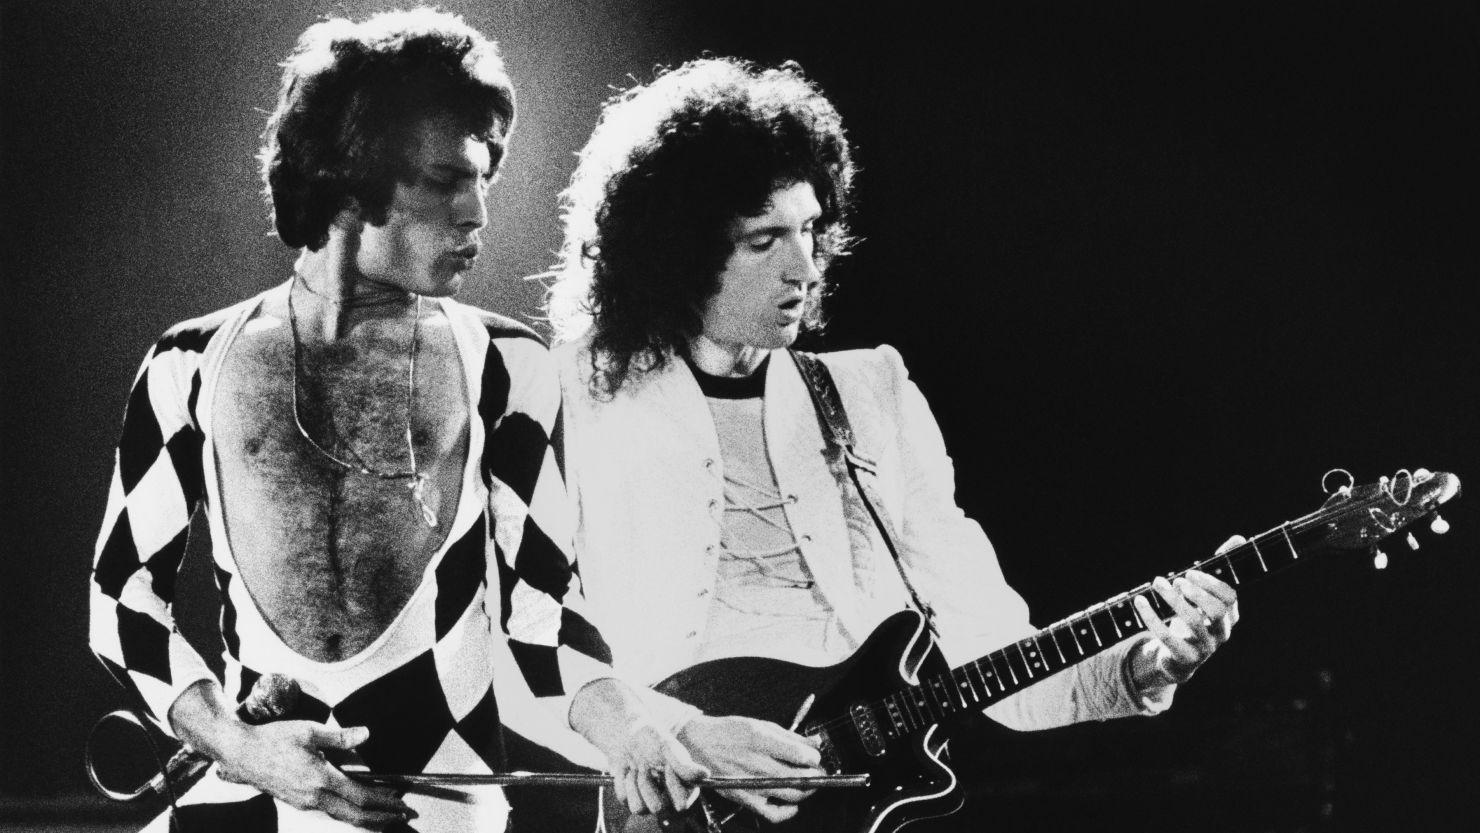 Singer Freddie Mercury and guitarist Brian May of the rock group Queen perform during a 1978 concert.